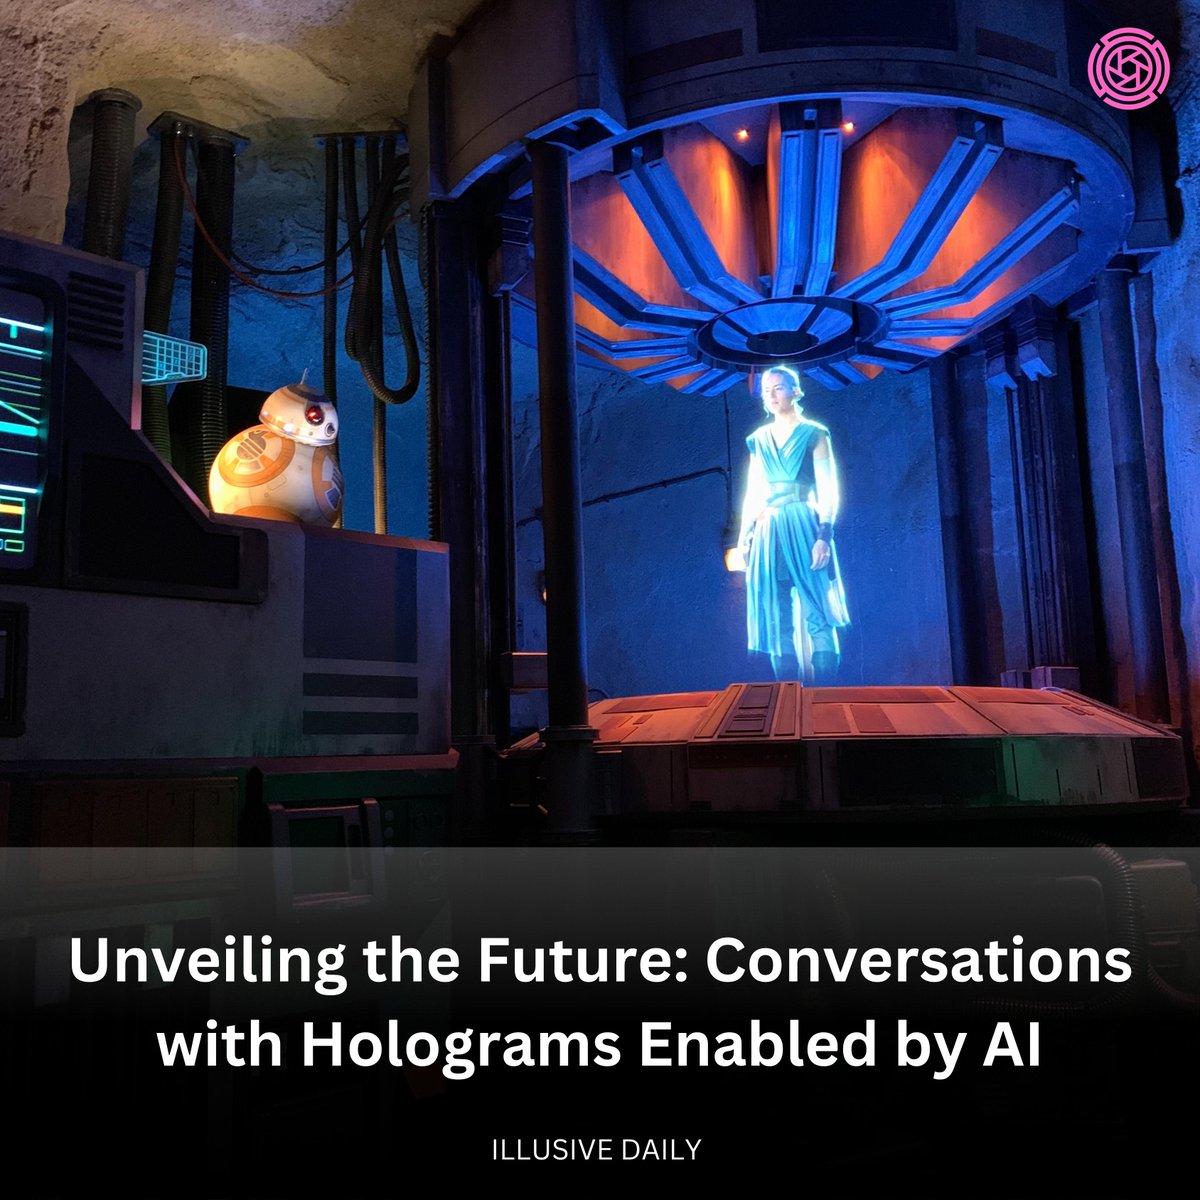 Imagine a world where you can engage in natural conversations with holographic characters, thanks to the power of artificial intelligence.
Discover more on our website through the link in our bio.

#news #blog #explore #Viral #Trending #AIHolograms #FutureOfInteraction